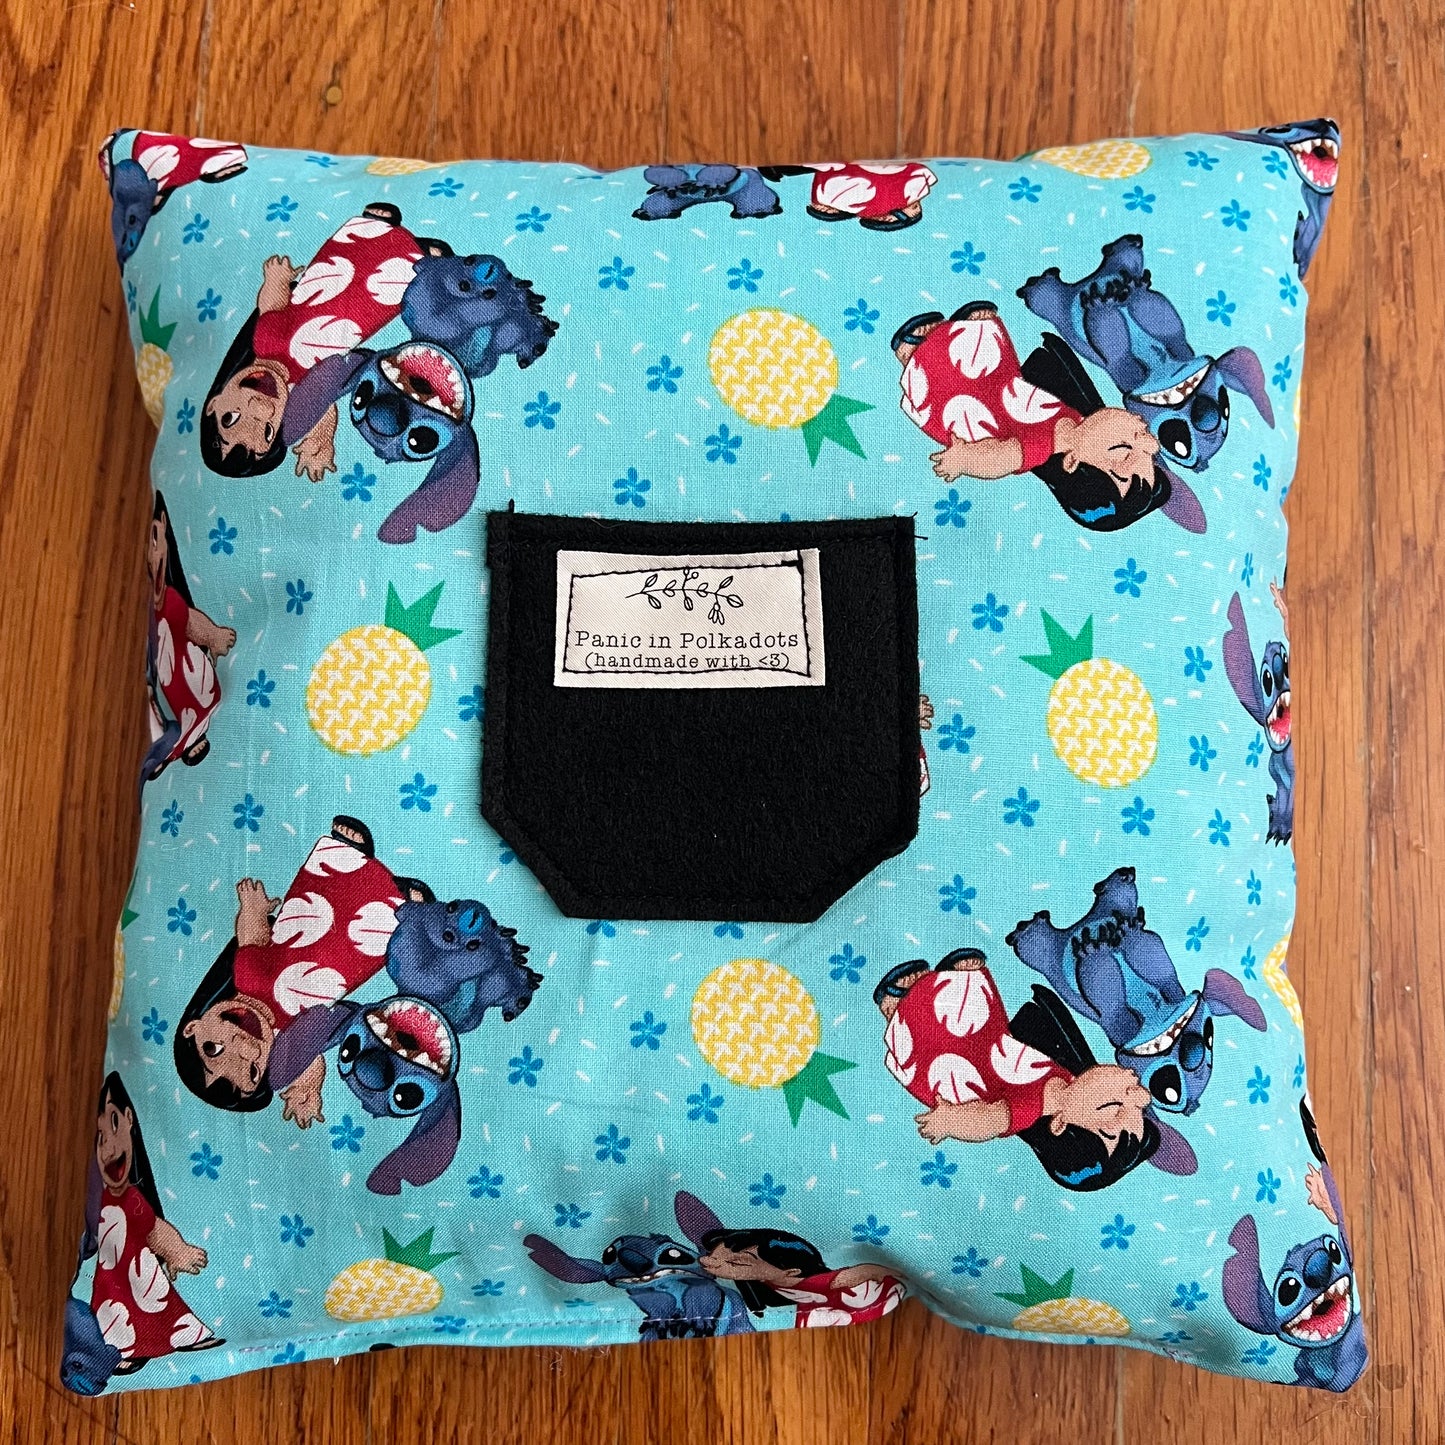 Back view of stitch pillow, showing Lilo & Stitch fabric and a pocket for tooth fairy collection